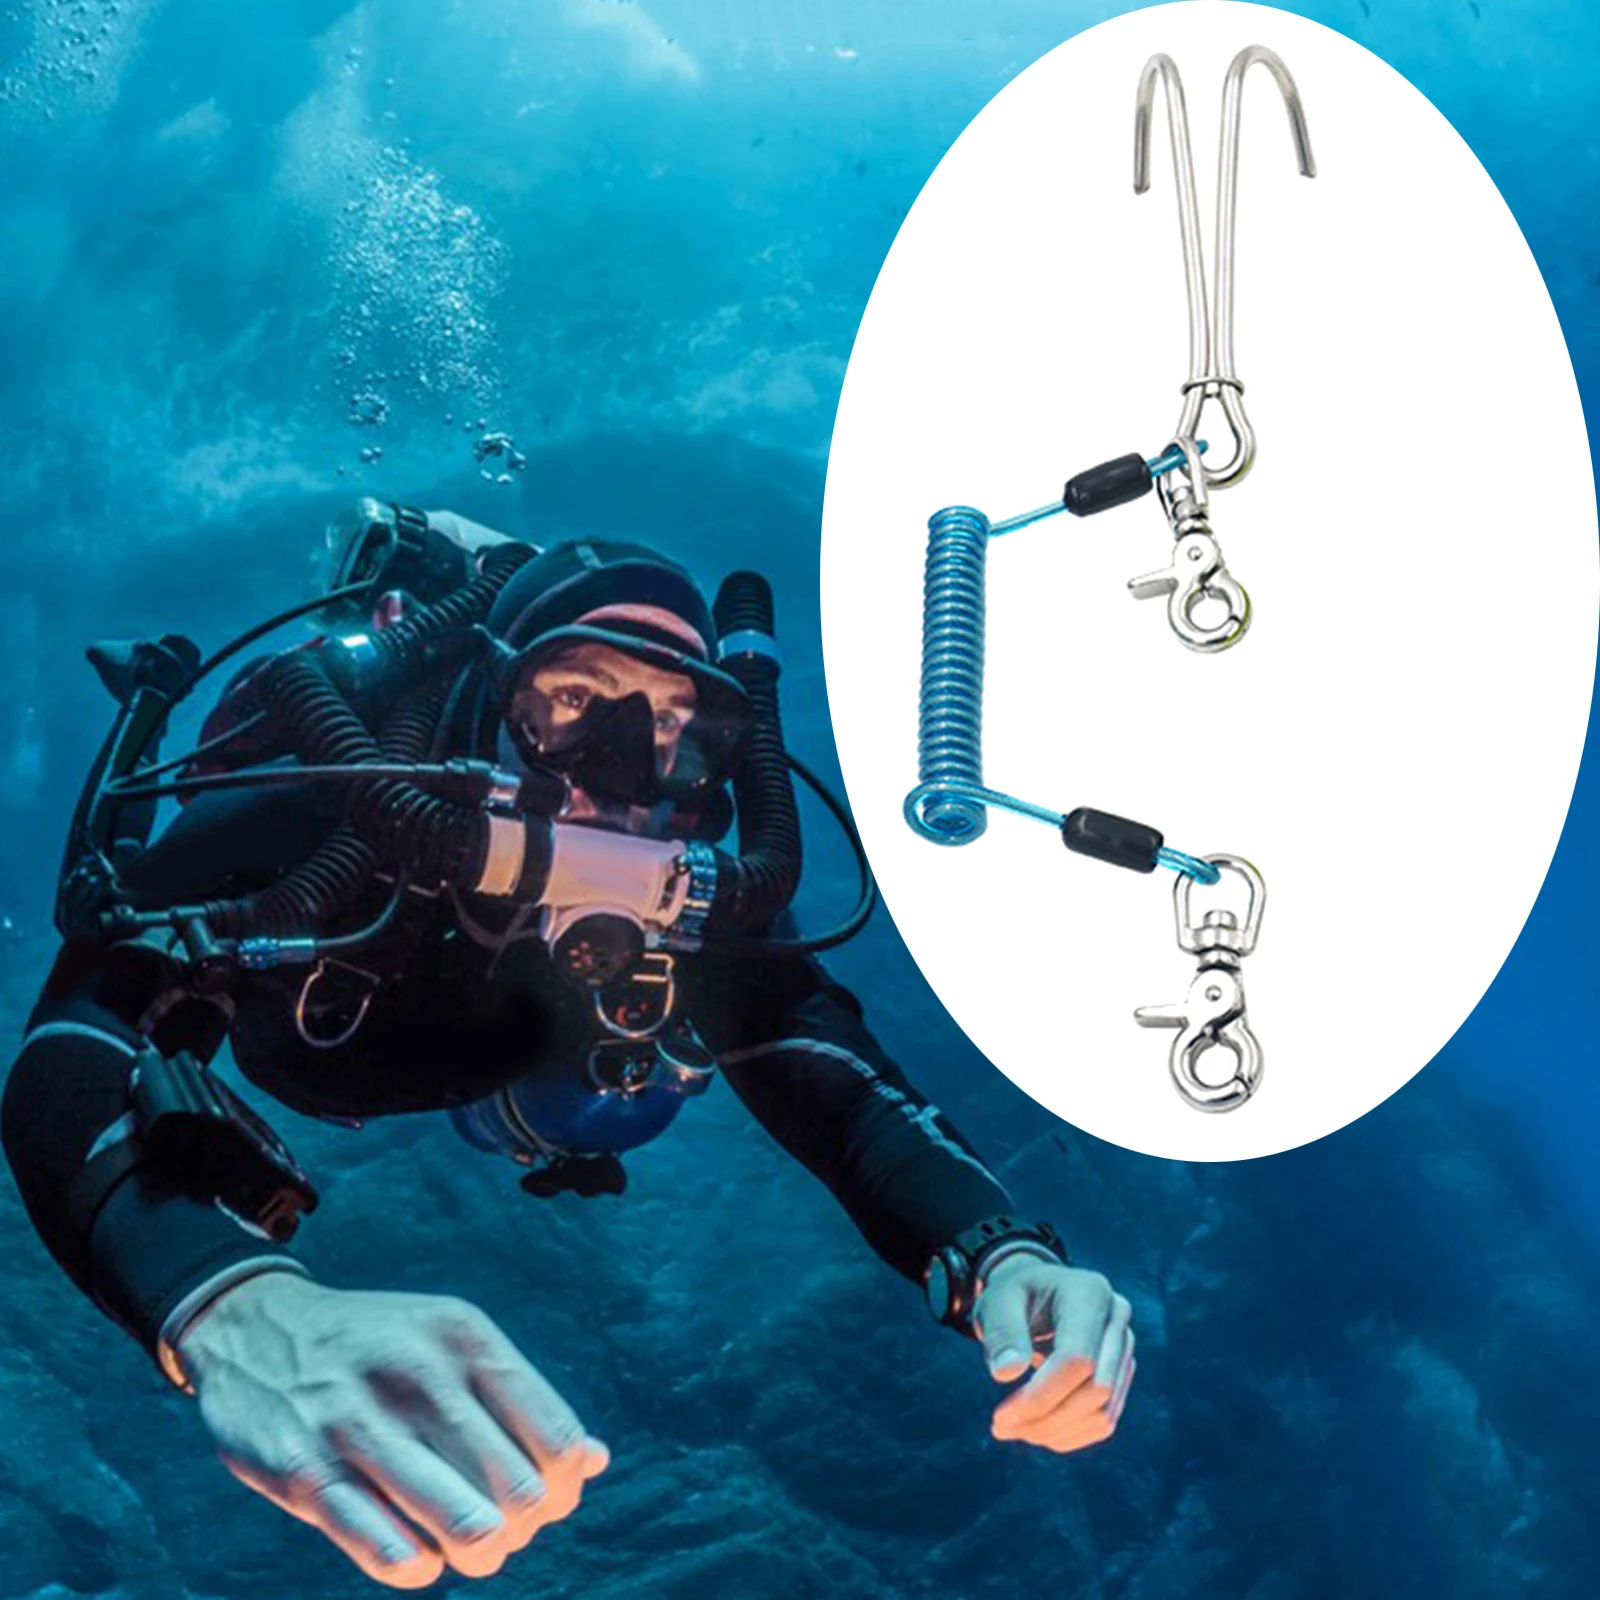 Durable Diving Dual Hook Stainless Steel Scuba Diving Double Reef Drift Hook with Line for Cave Dive Underwater Photography Safety Equipment 